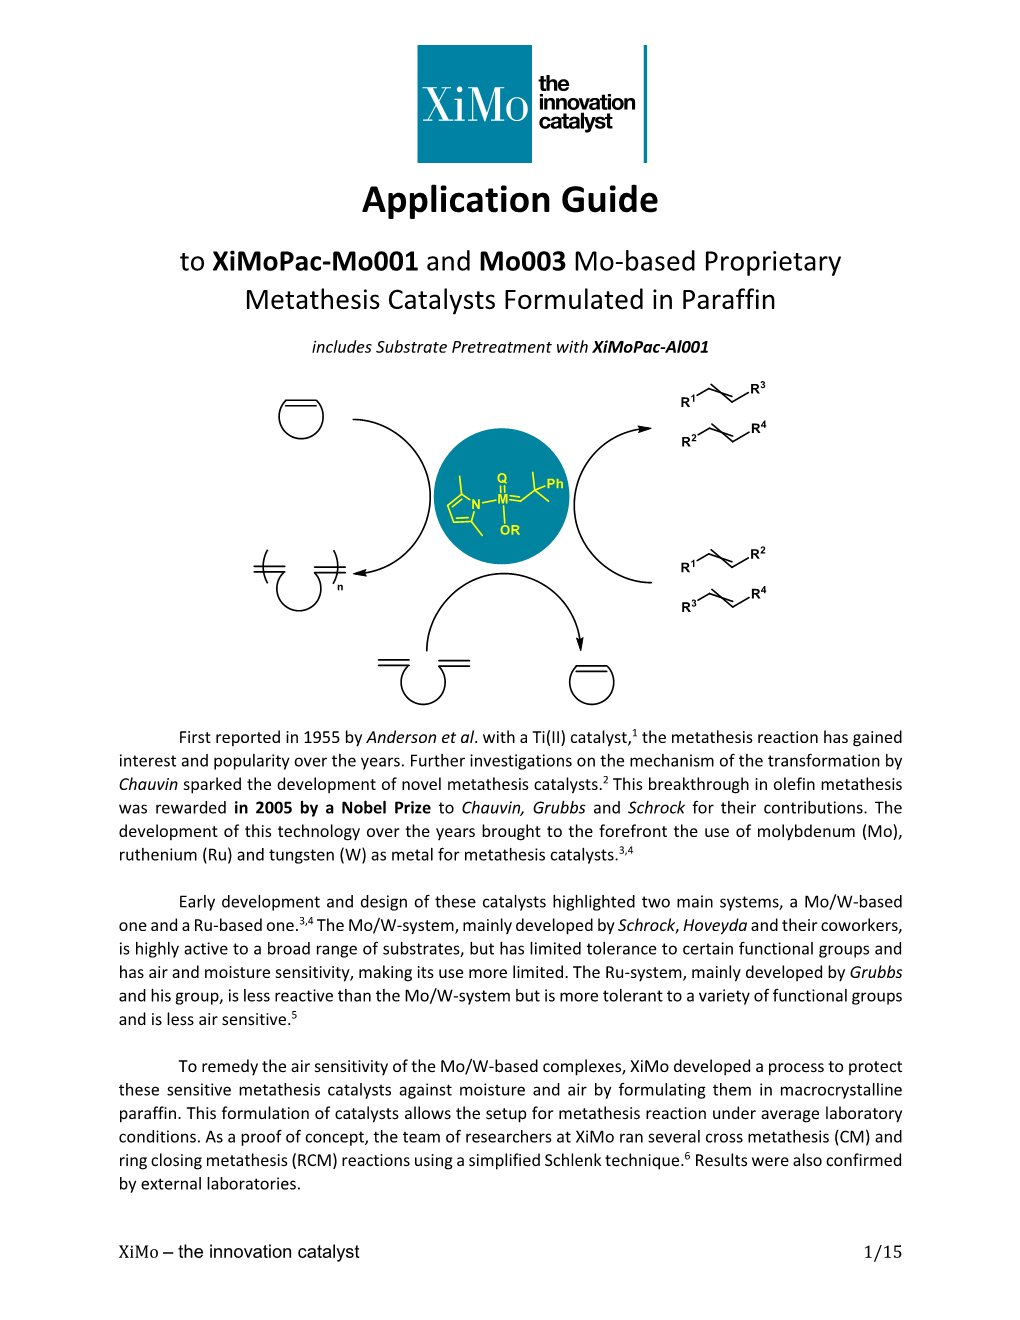 Application Guide to Ximopac-Mo001 and Mo003 Mo-Based Proprietary Metathesis Catalysts Formulated in Paraffin